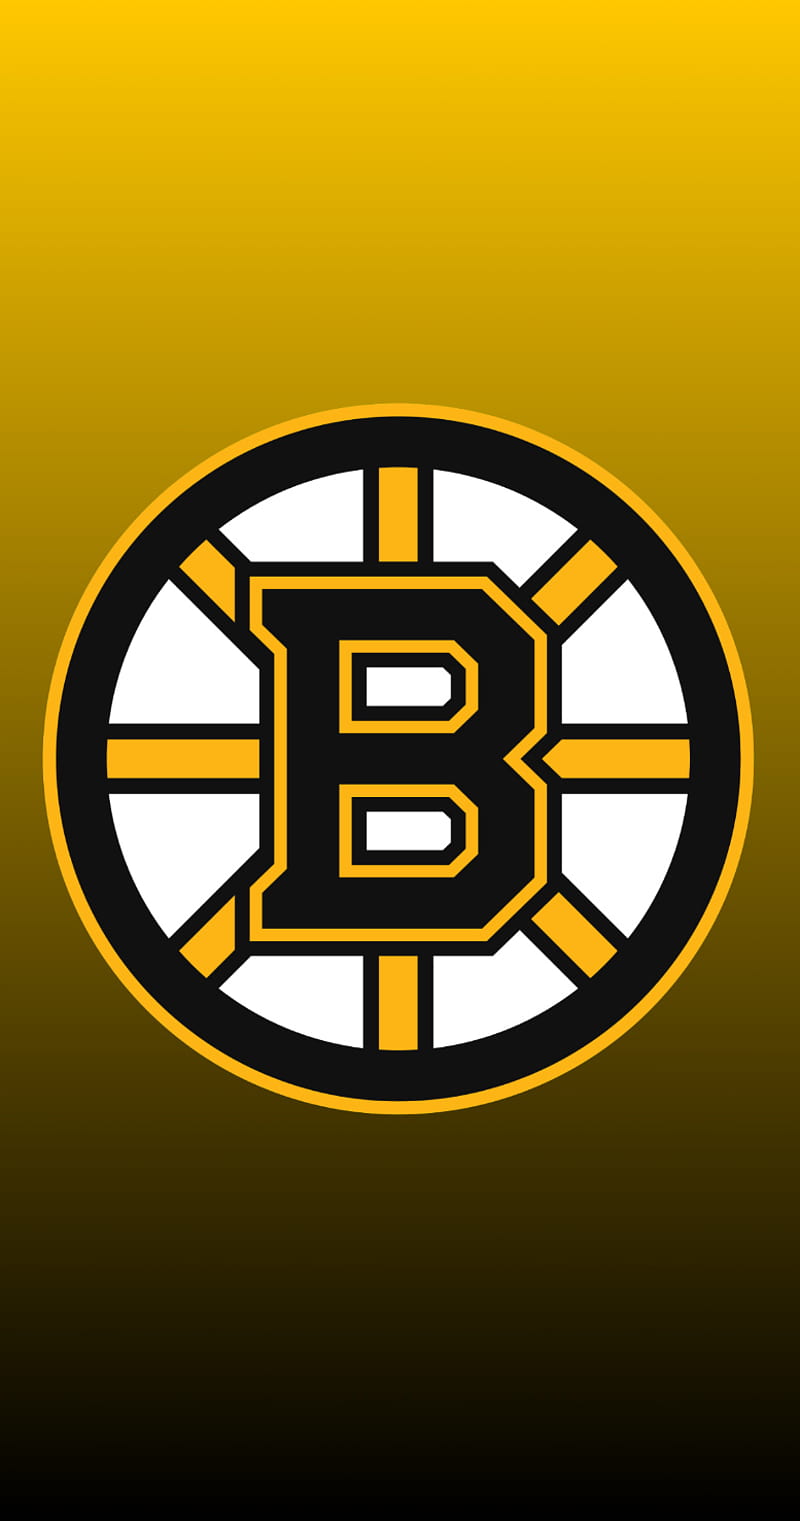 Boston Bruins on Twitter Who wants more wallpaper   TDFansgiving httpstco5FGWwOHato  Twitter